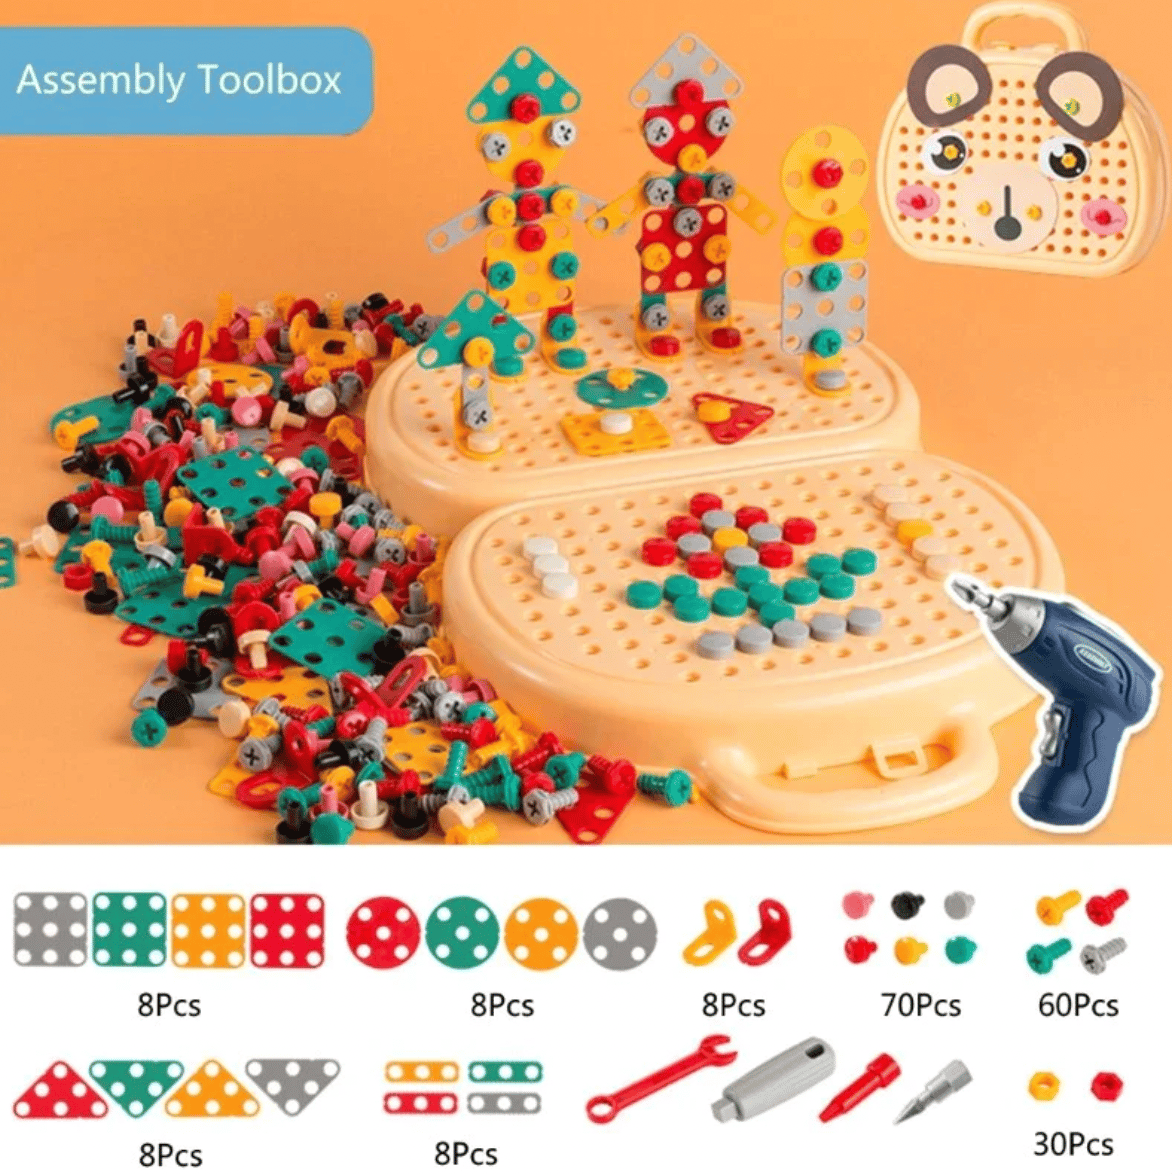 🎄Christmas Hot Sale 70% OFF🎄Creativity Tool Box🔥Buy 2 10% OFF&Free Shipping